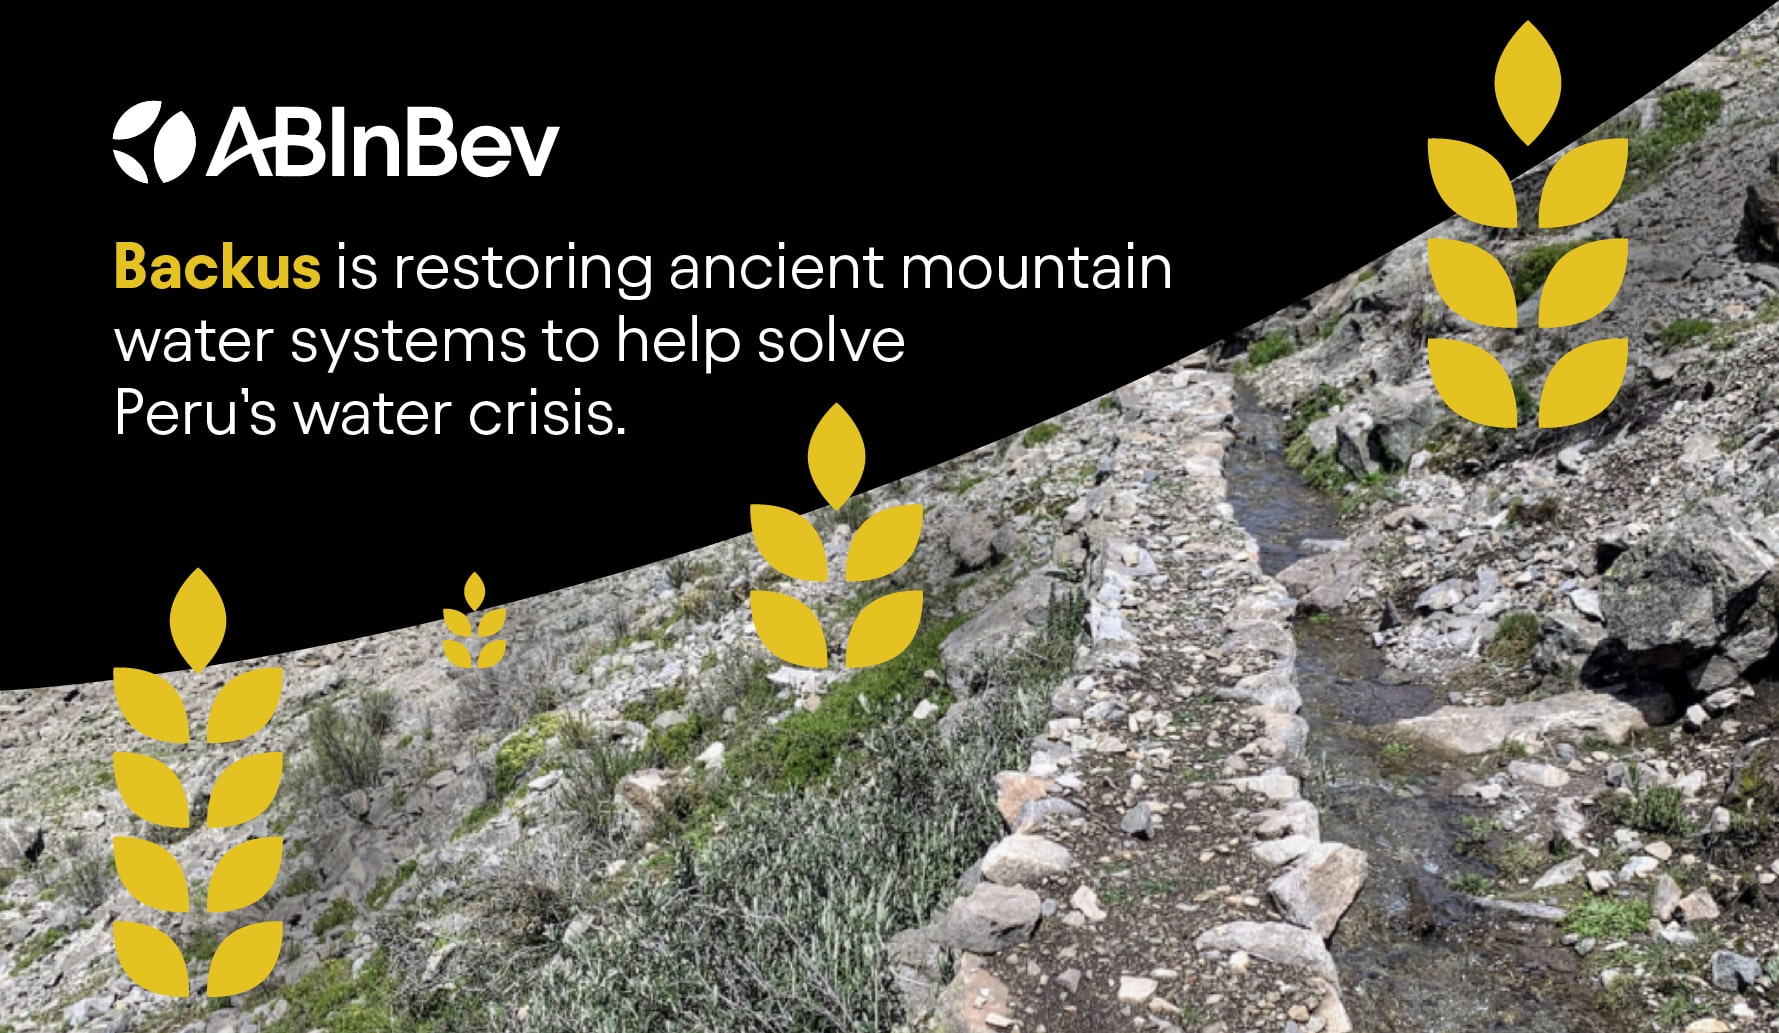 Local brewer Backus and partners restoring ancient mountain water systems to help solve Peru’s water crisis